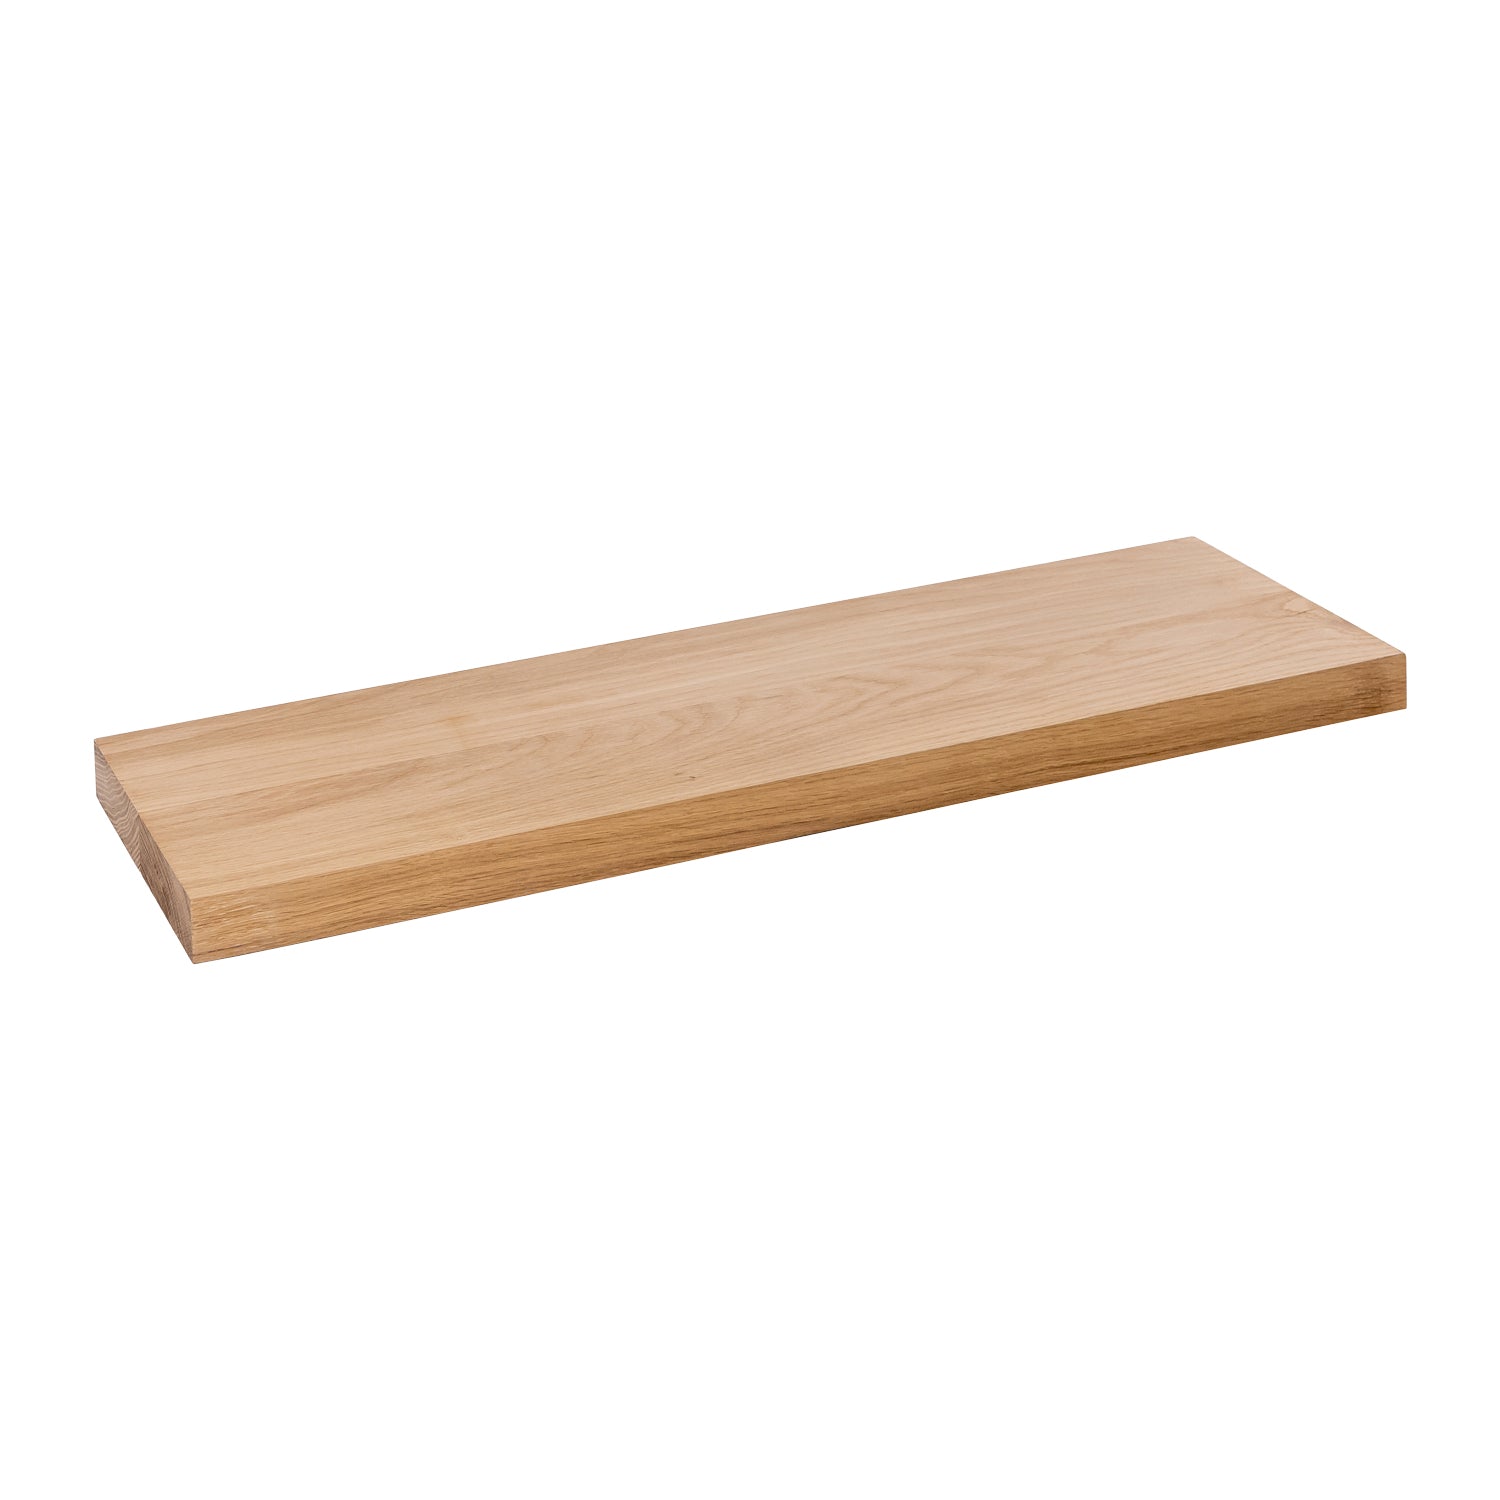 Full Stave Prime Oak Solid Wood Shelf - 40mm thick